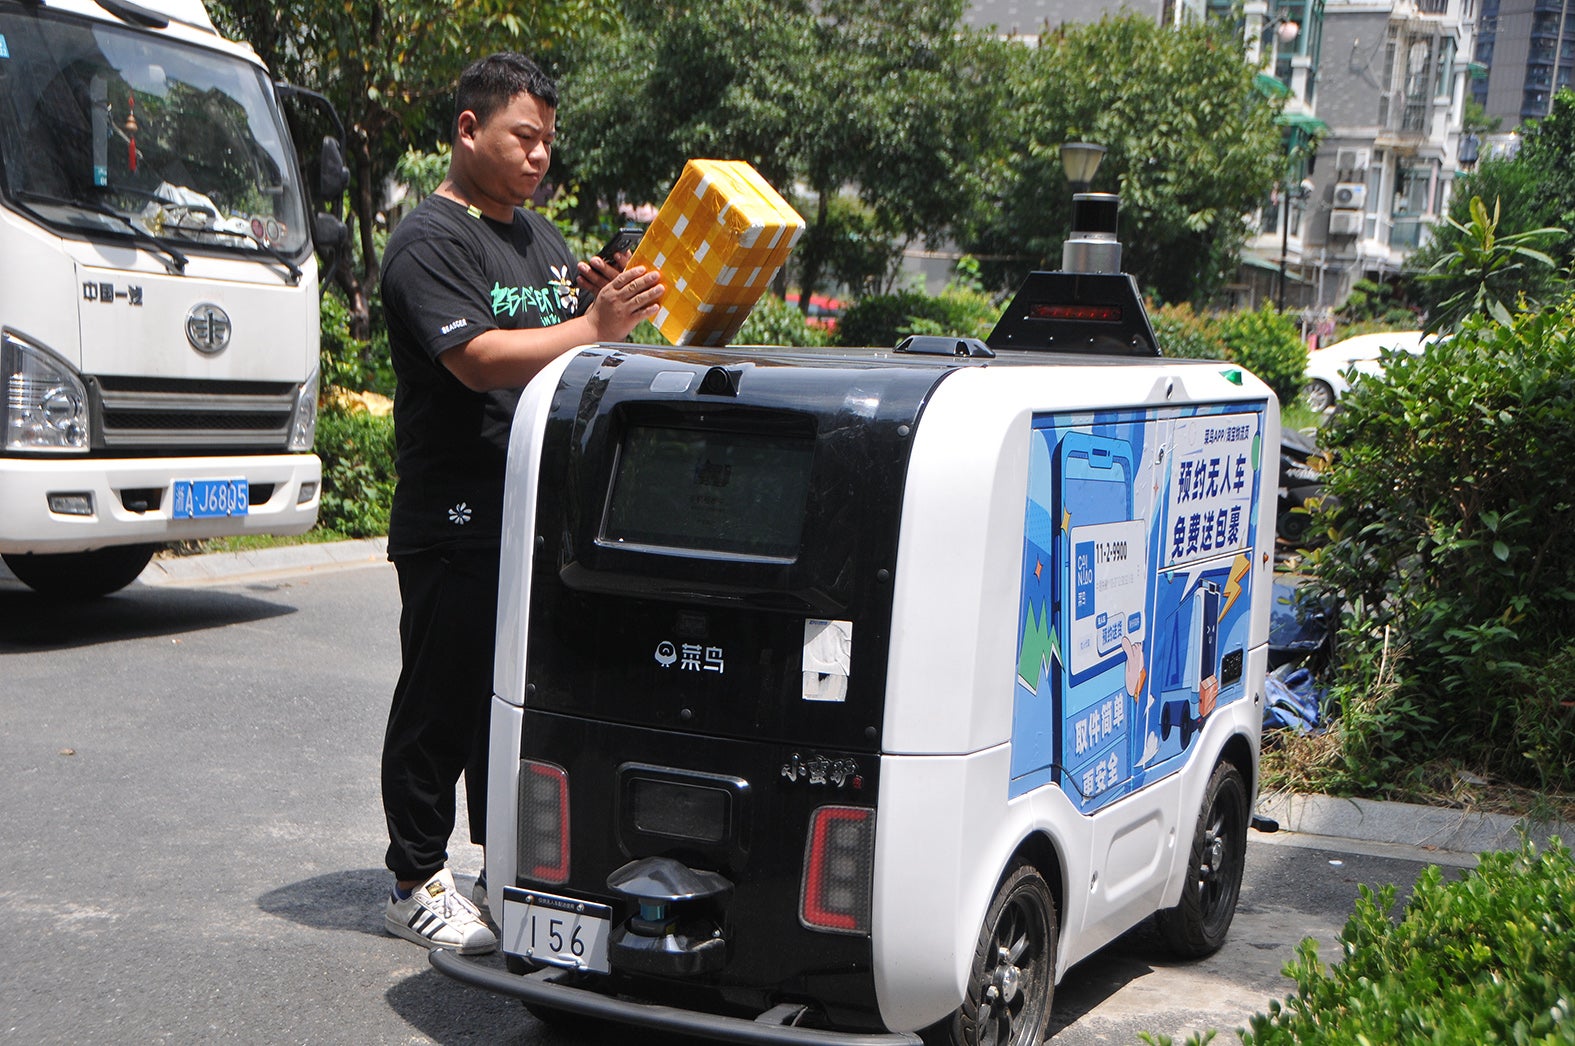 A man picks up a parcel from a Cainiao autonomous delivery vehicle at a community in Hangzhou, Zhejiang province, in August